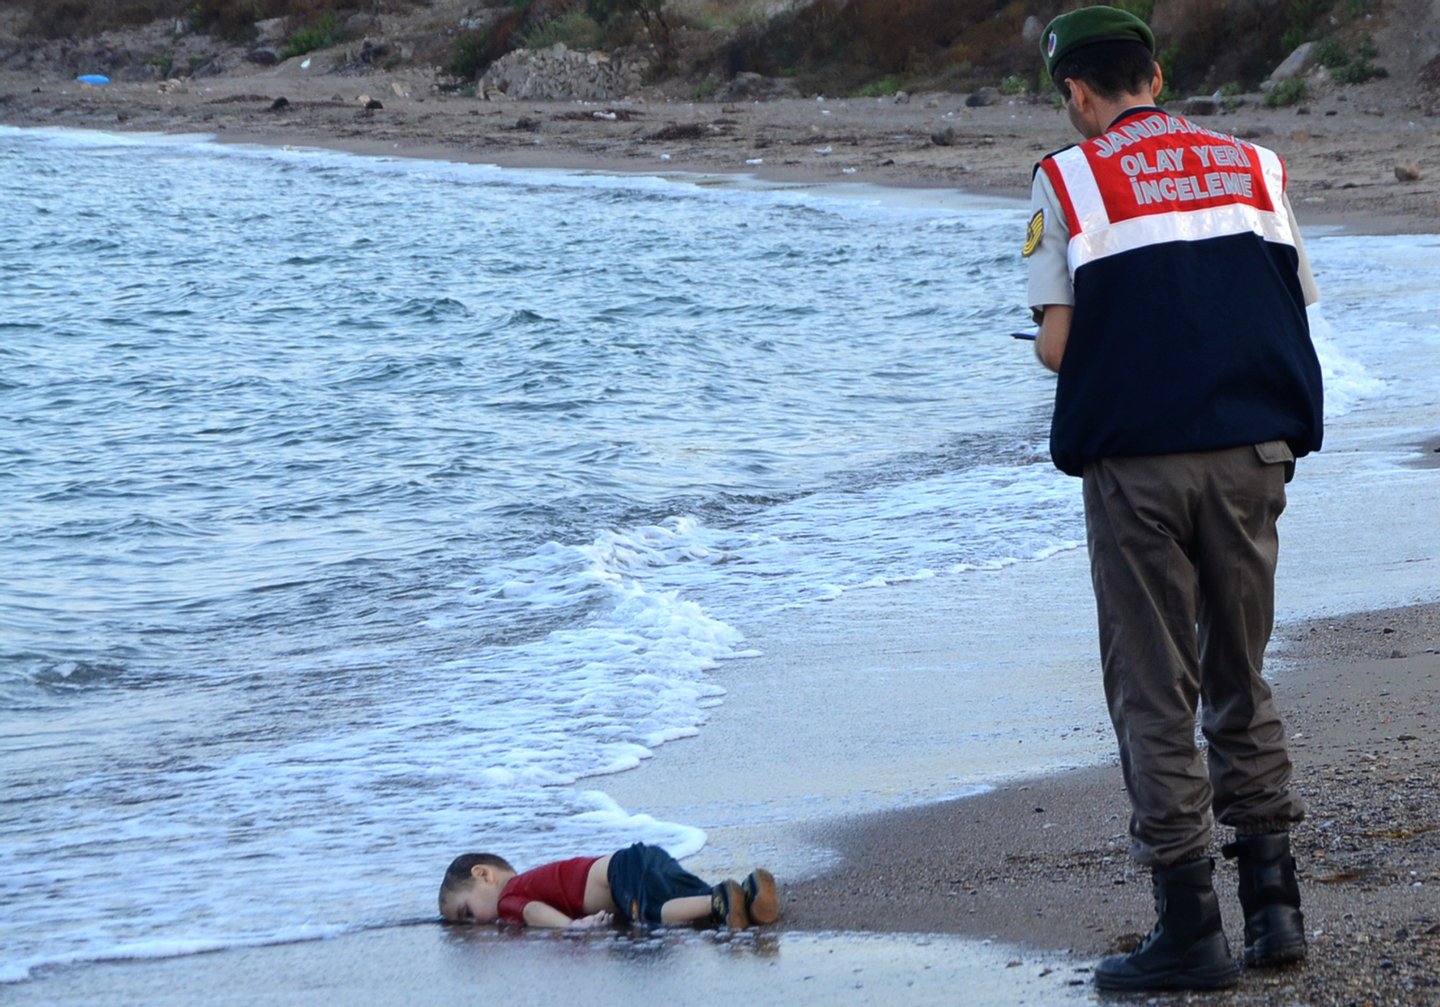 GRAPHIC CONTENT A Turkish police officer stands next to a migrant child's dead body (Aylan Shenu) off the shores in Bodrum, southern Turkey, on September 2, 2015 after a boat carrying refugees sank while reaching the Greek island of Kos. Thousands of refugees and migrants arrived in Athens on September 2, as Greek ministers held talks on the crisis, with Europe struggling to cope with the huge influx fleeing war and repression in the Middle East and Africa. / AFP / DOGAN NEWS AGENCY / Nilufer Demir (Photo credit should read NILUFER DEMIR/AFP/Getty Images)